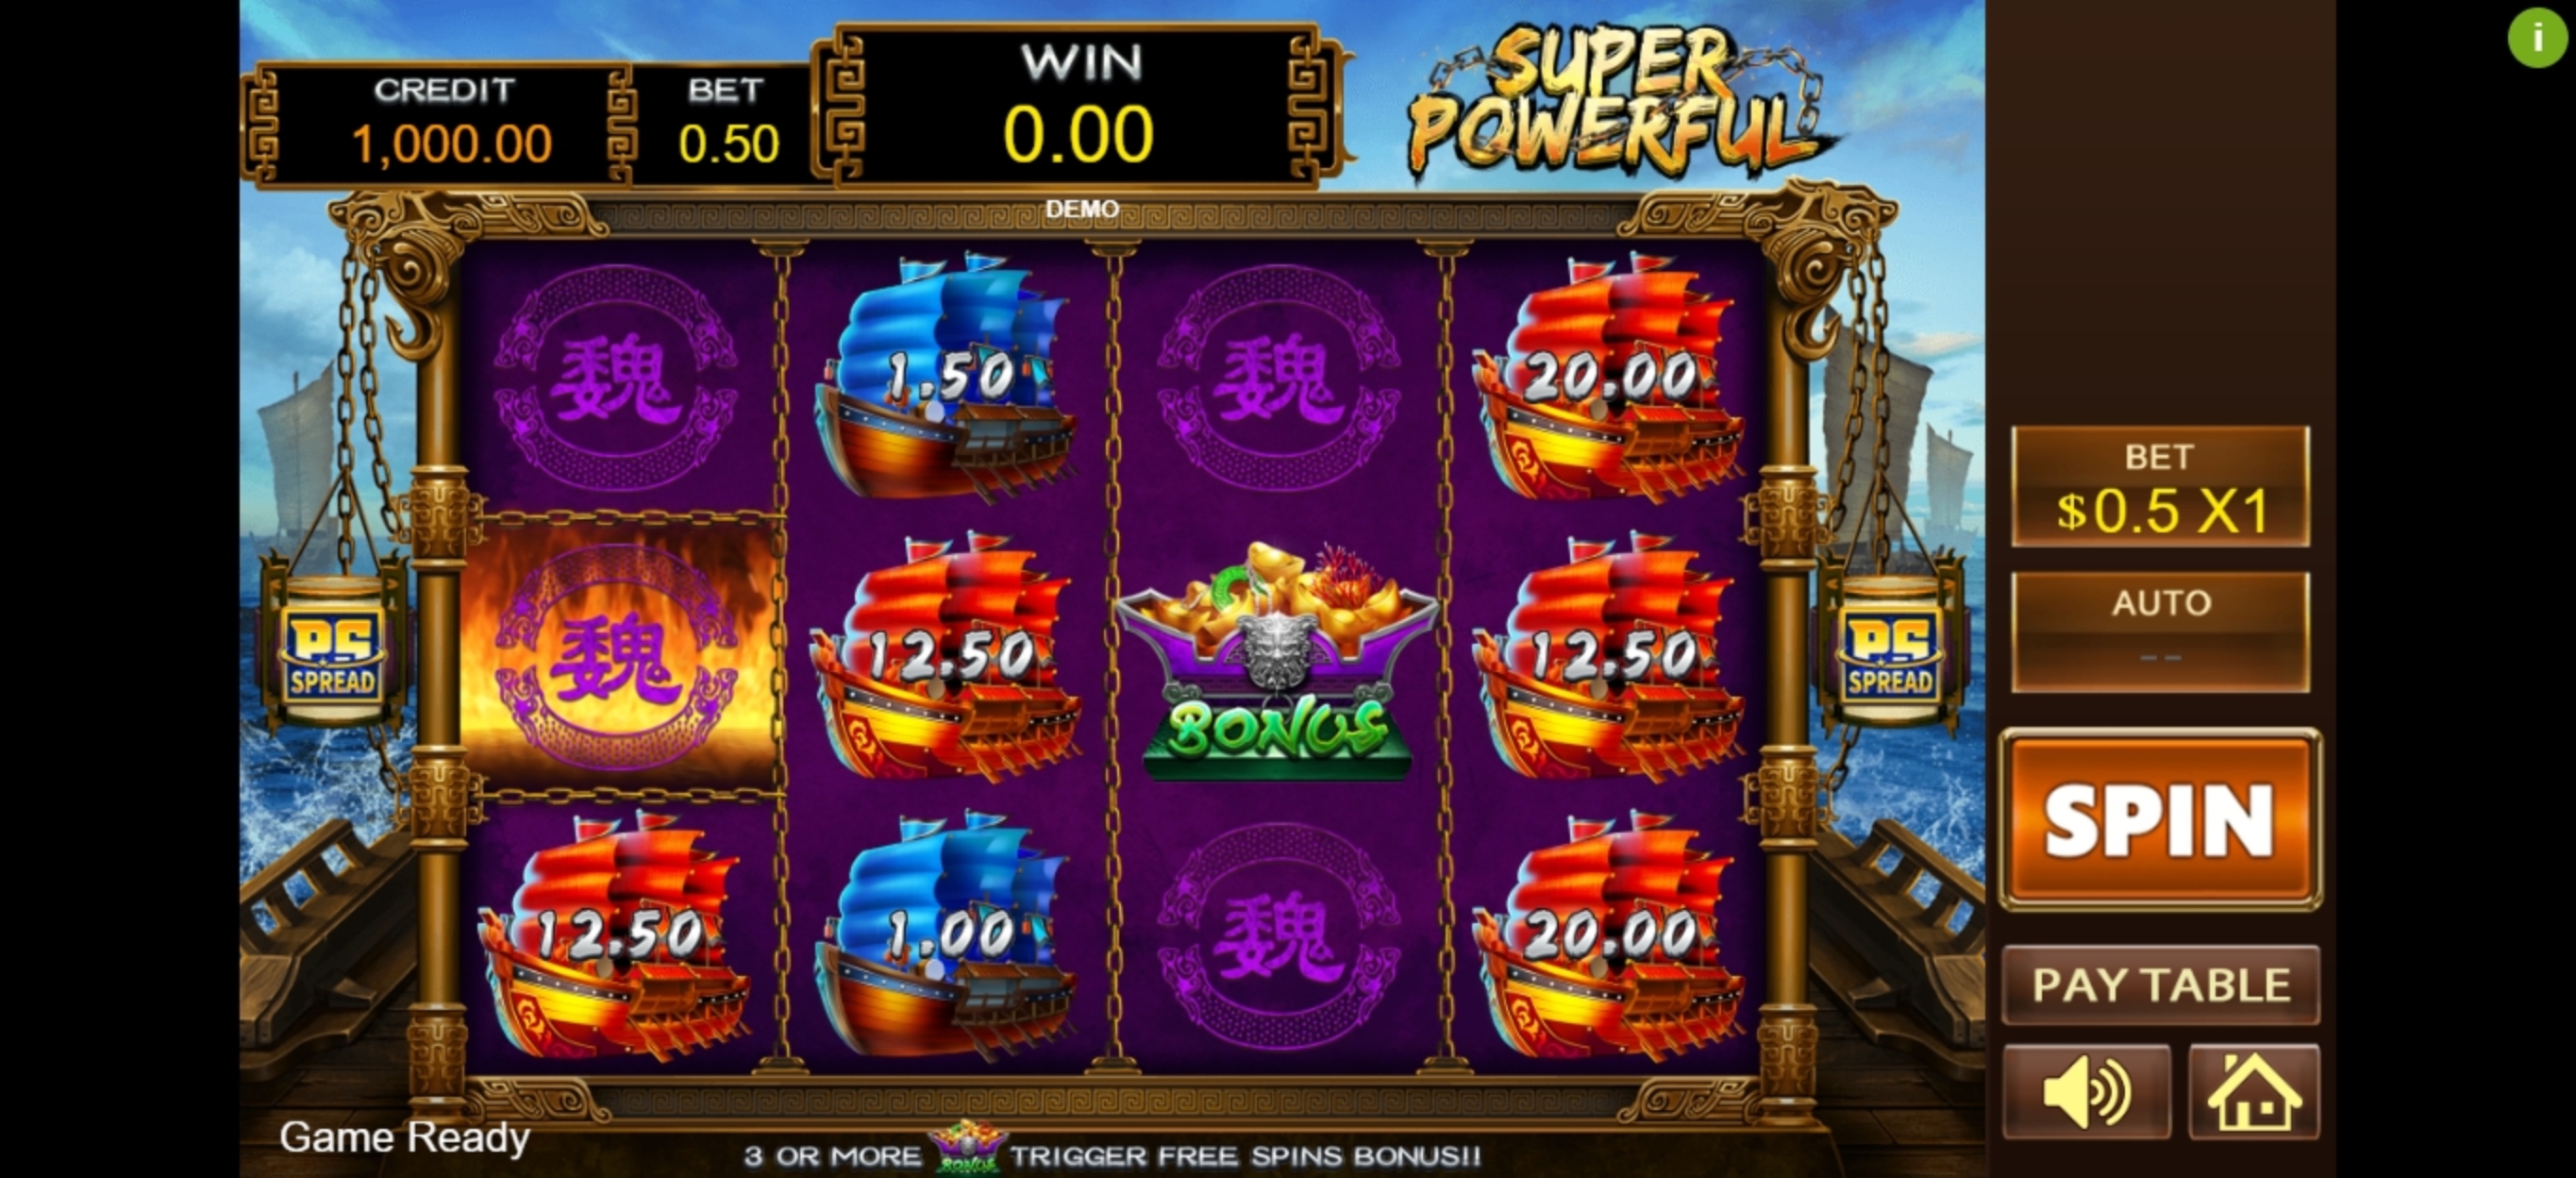 Reels in Super Powerful Slot Game by PlayStar